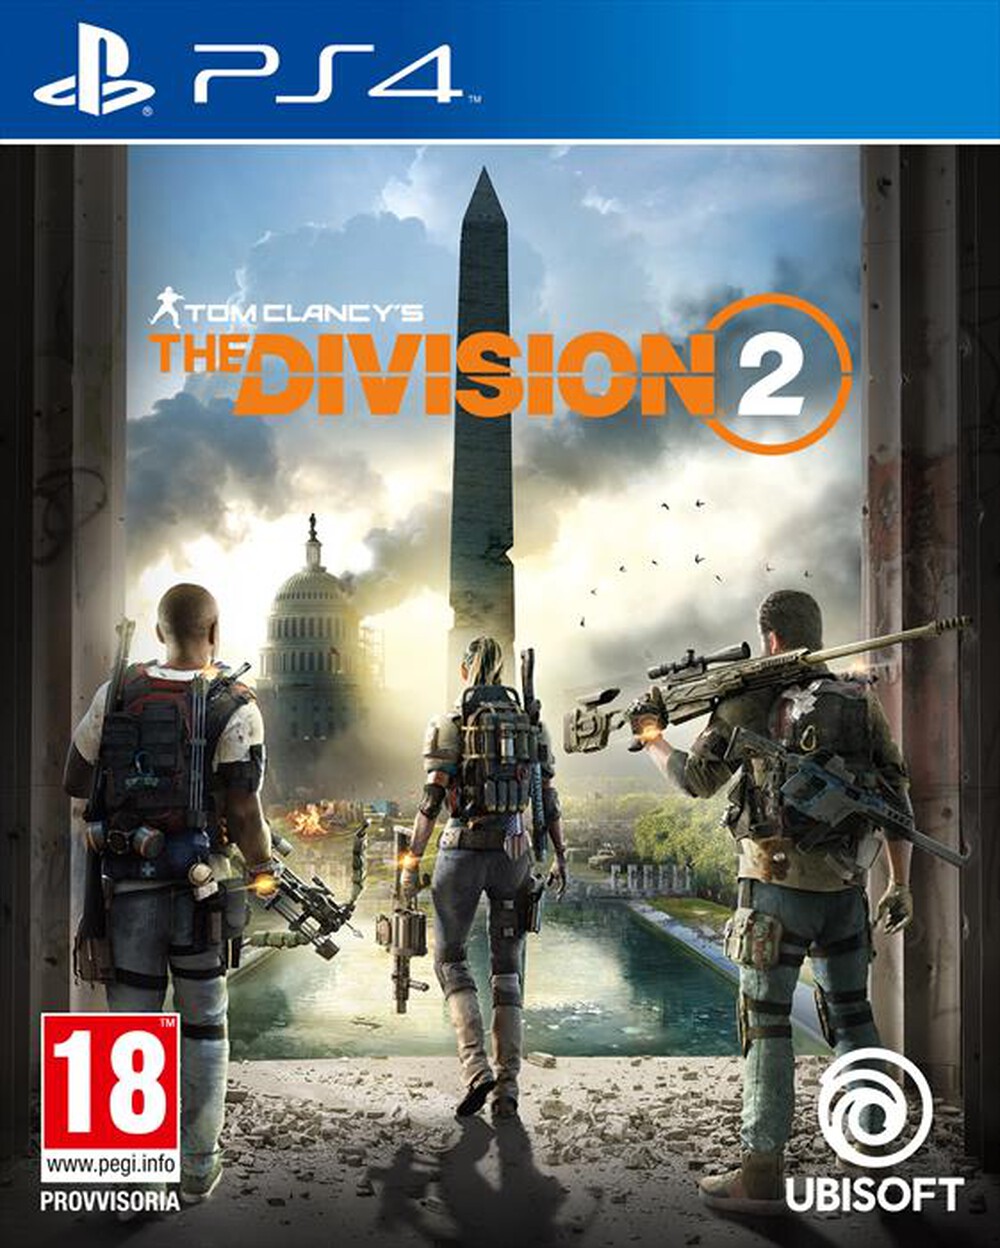 "UBISOFT - THE DIVISION 2 PS4"